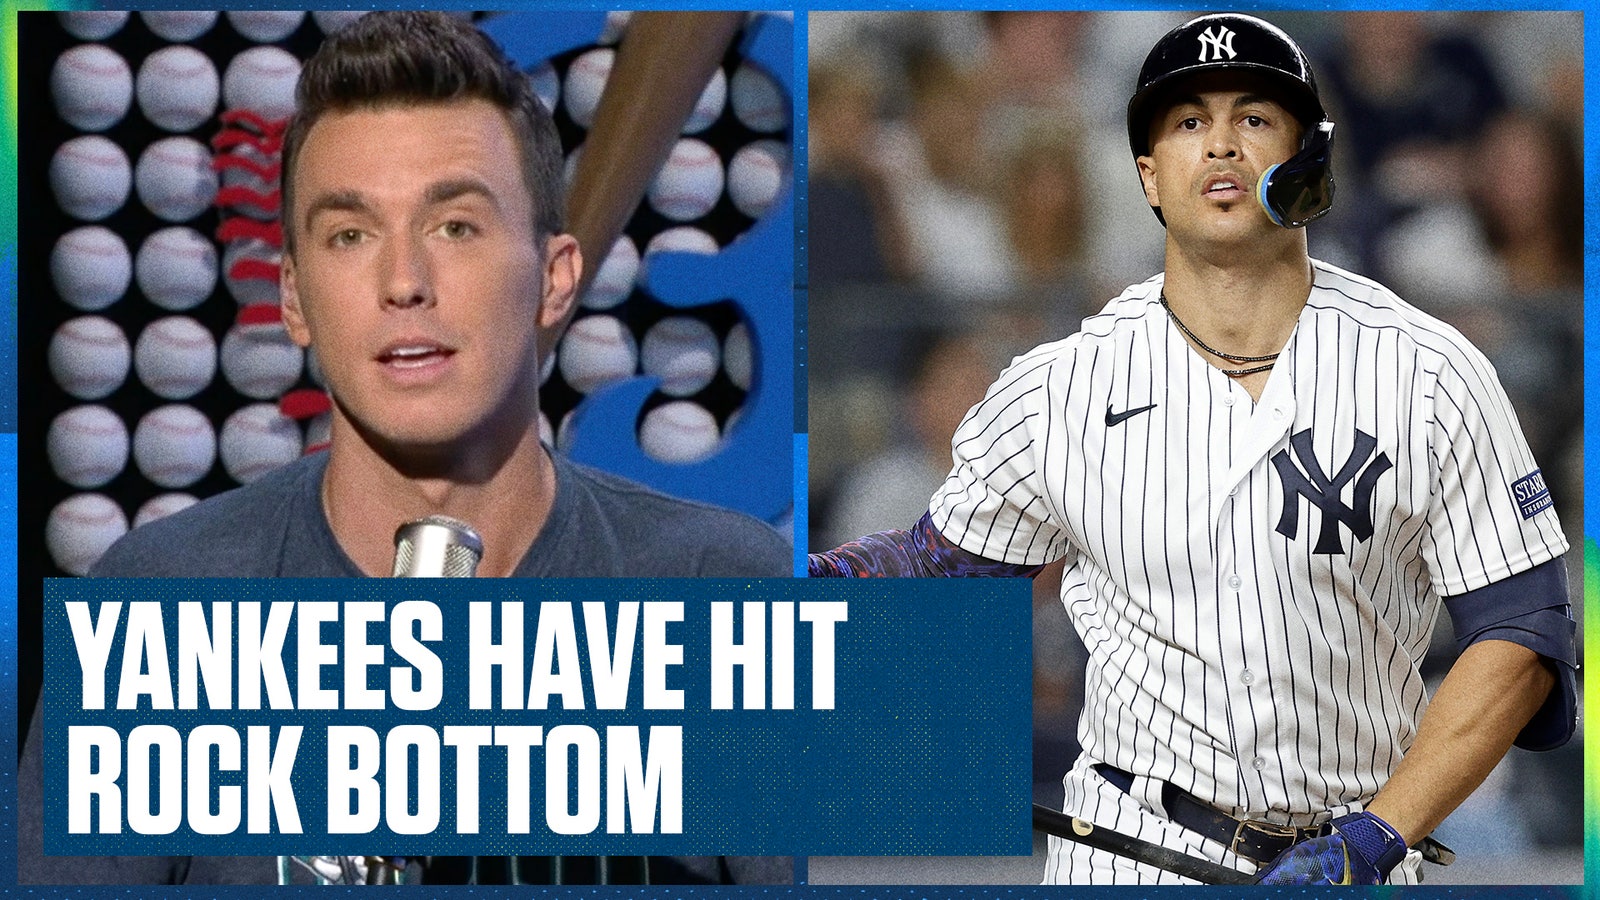 New York Yankees have officially hit rock bottom